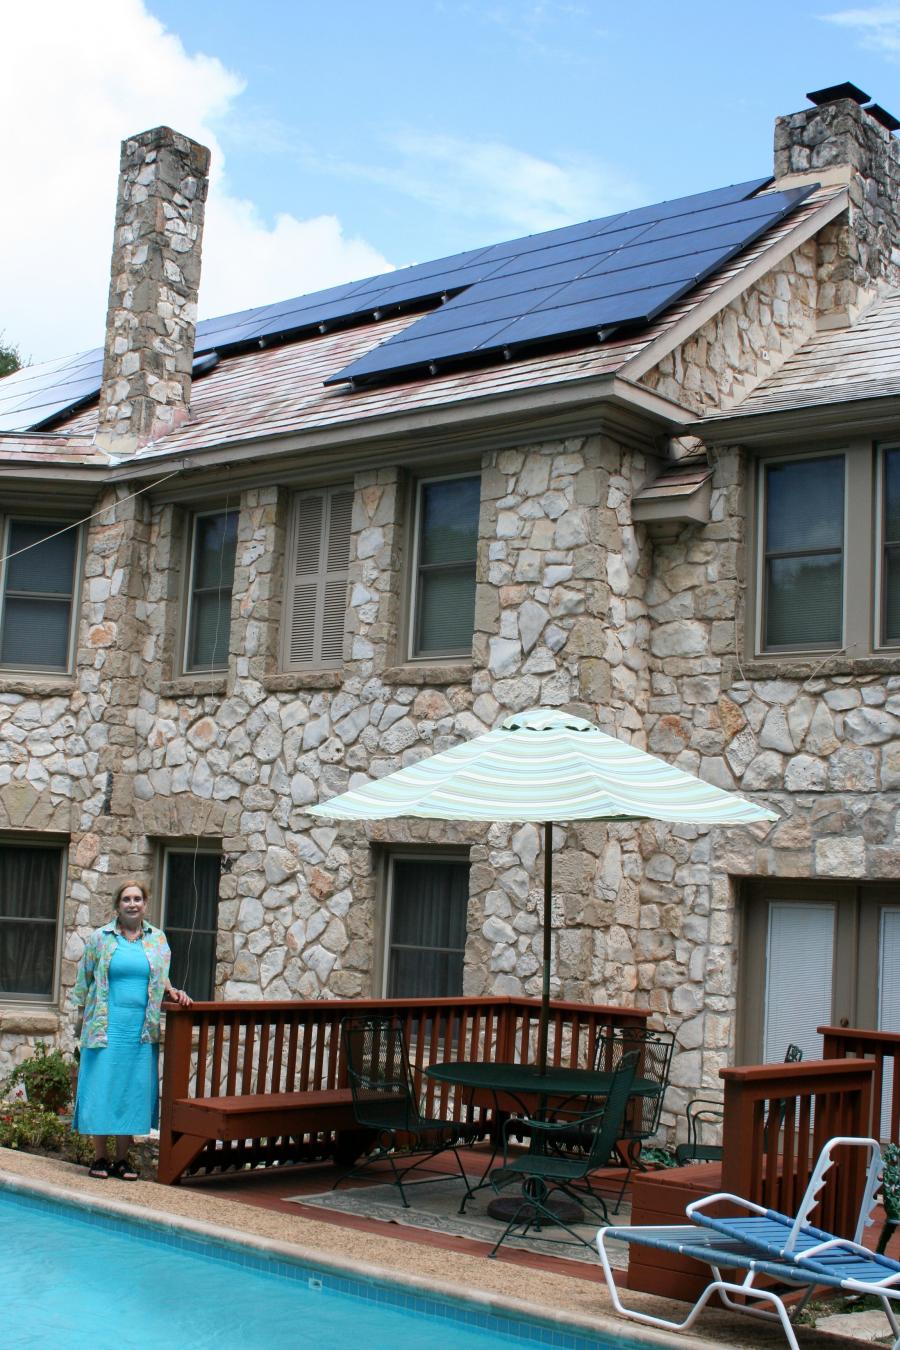 person standing next to a home with solar panels on the roof